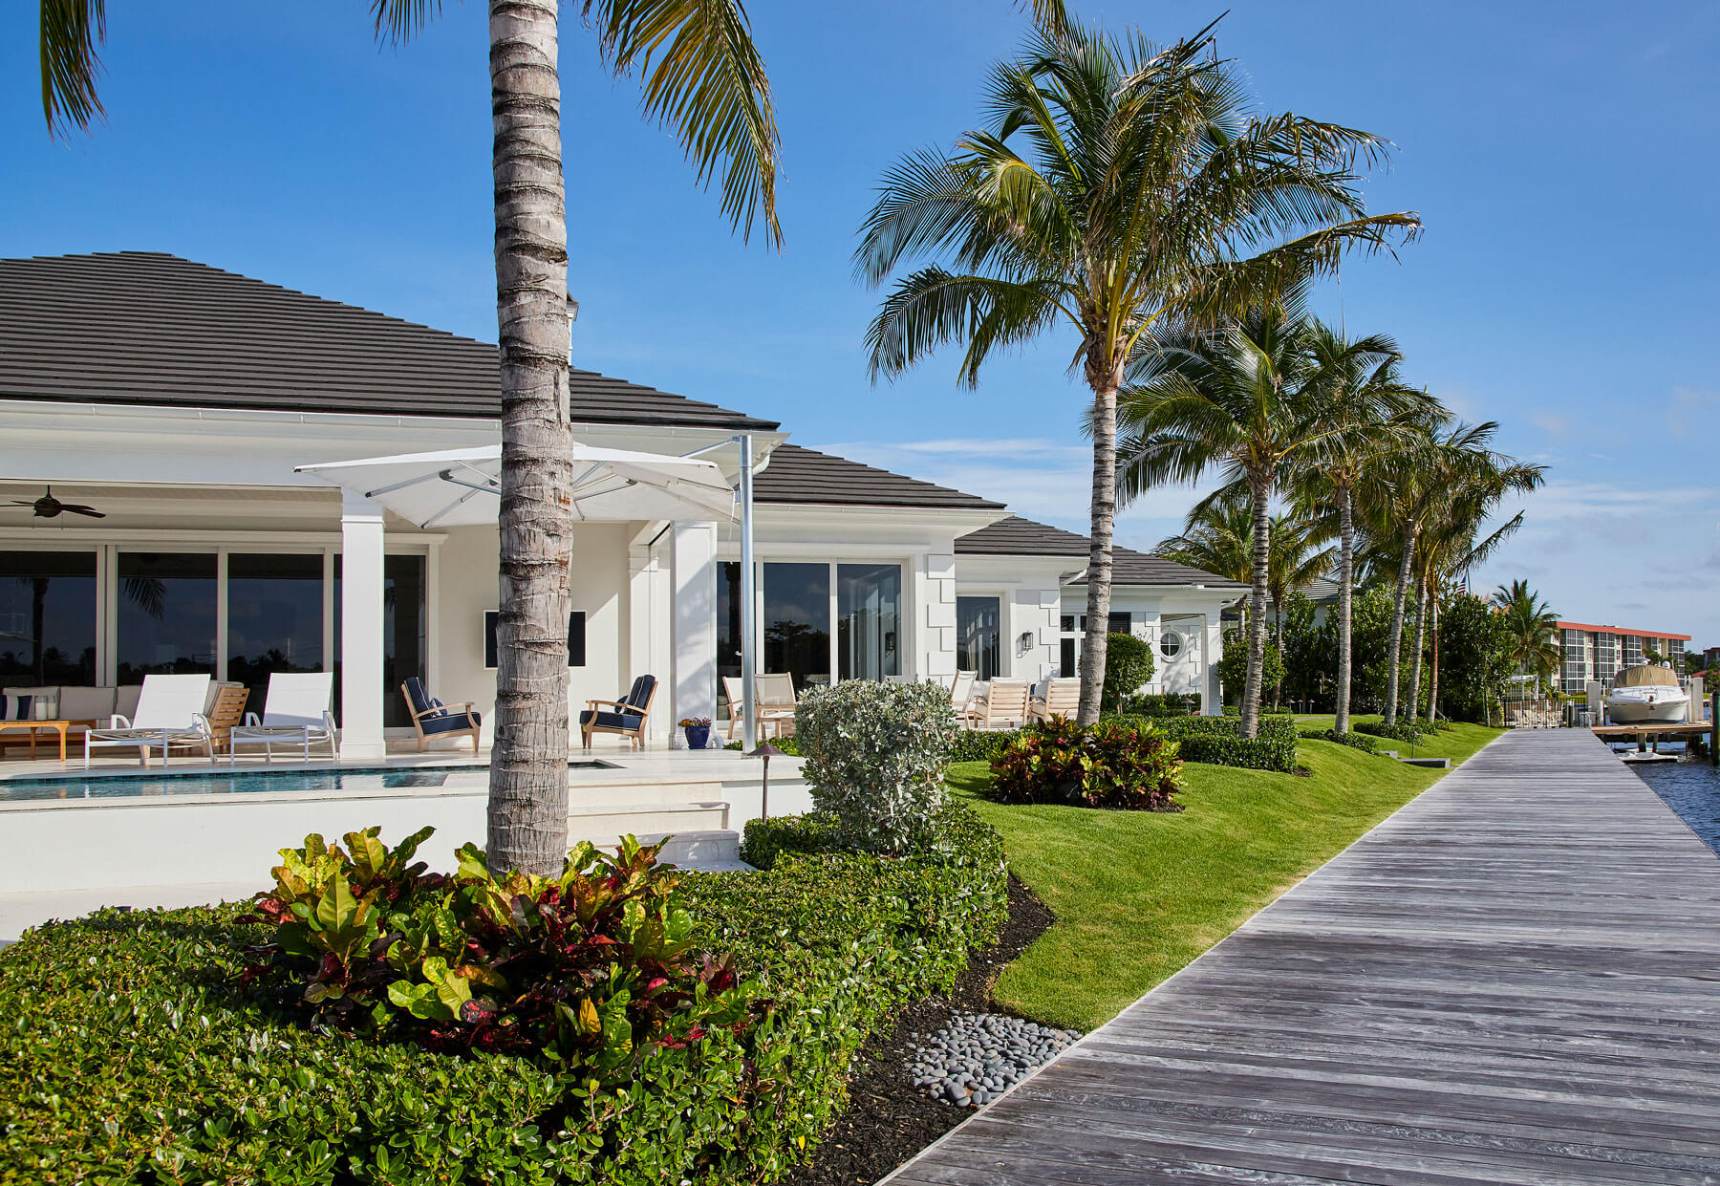 A white house with palm trees and a wooden walkway.